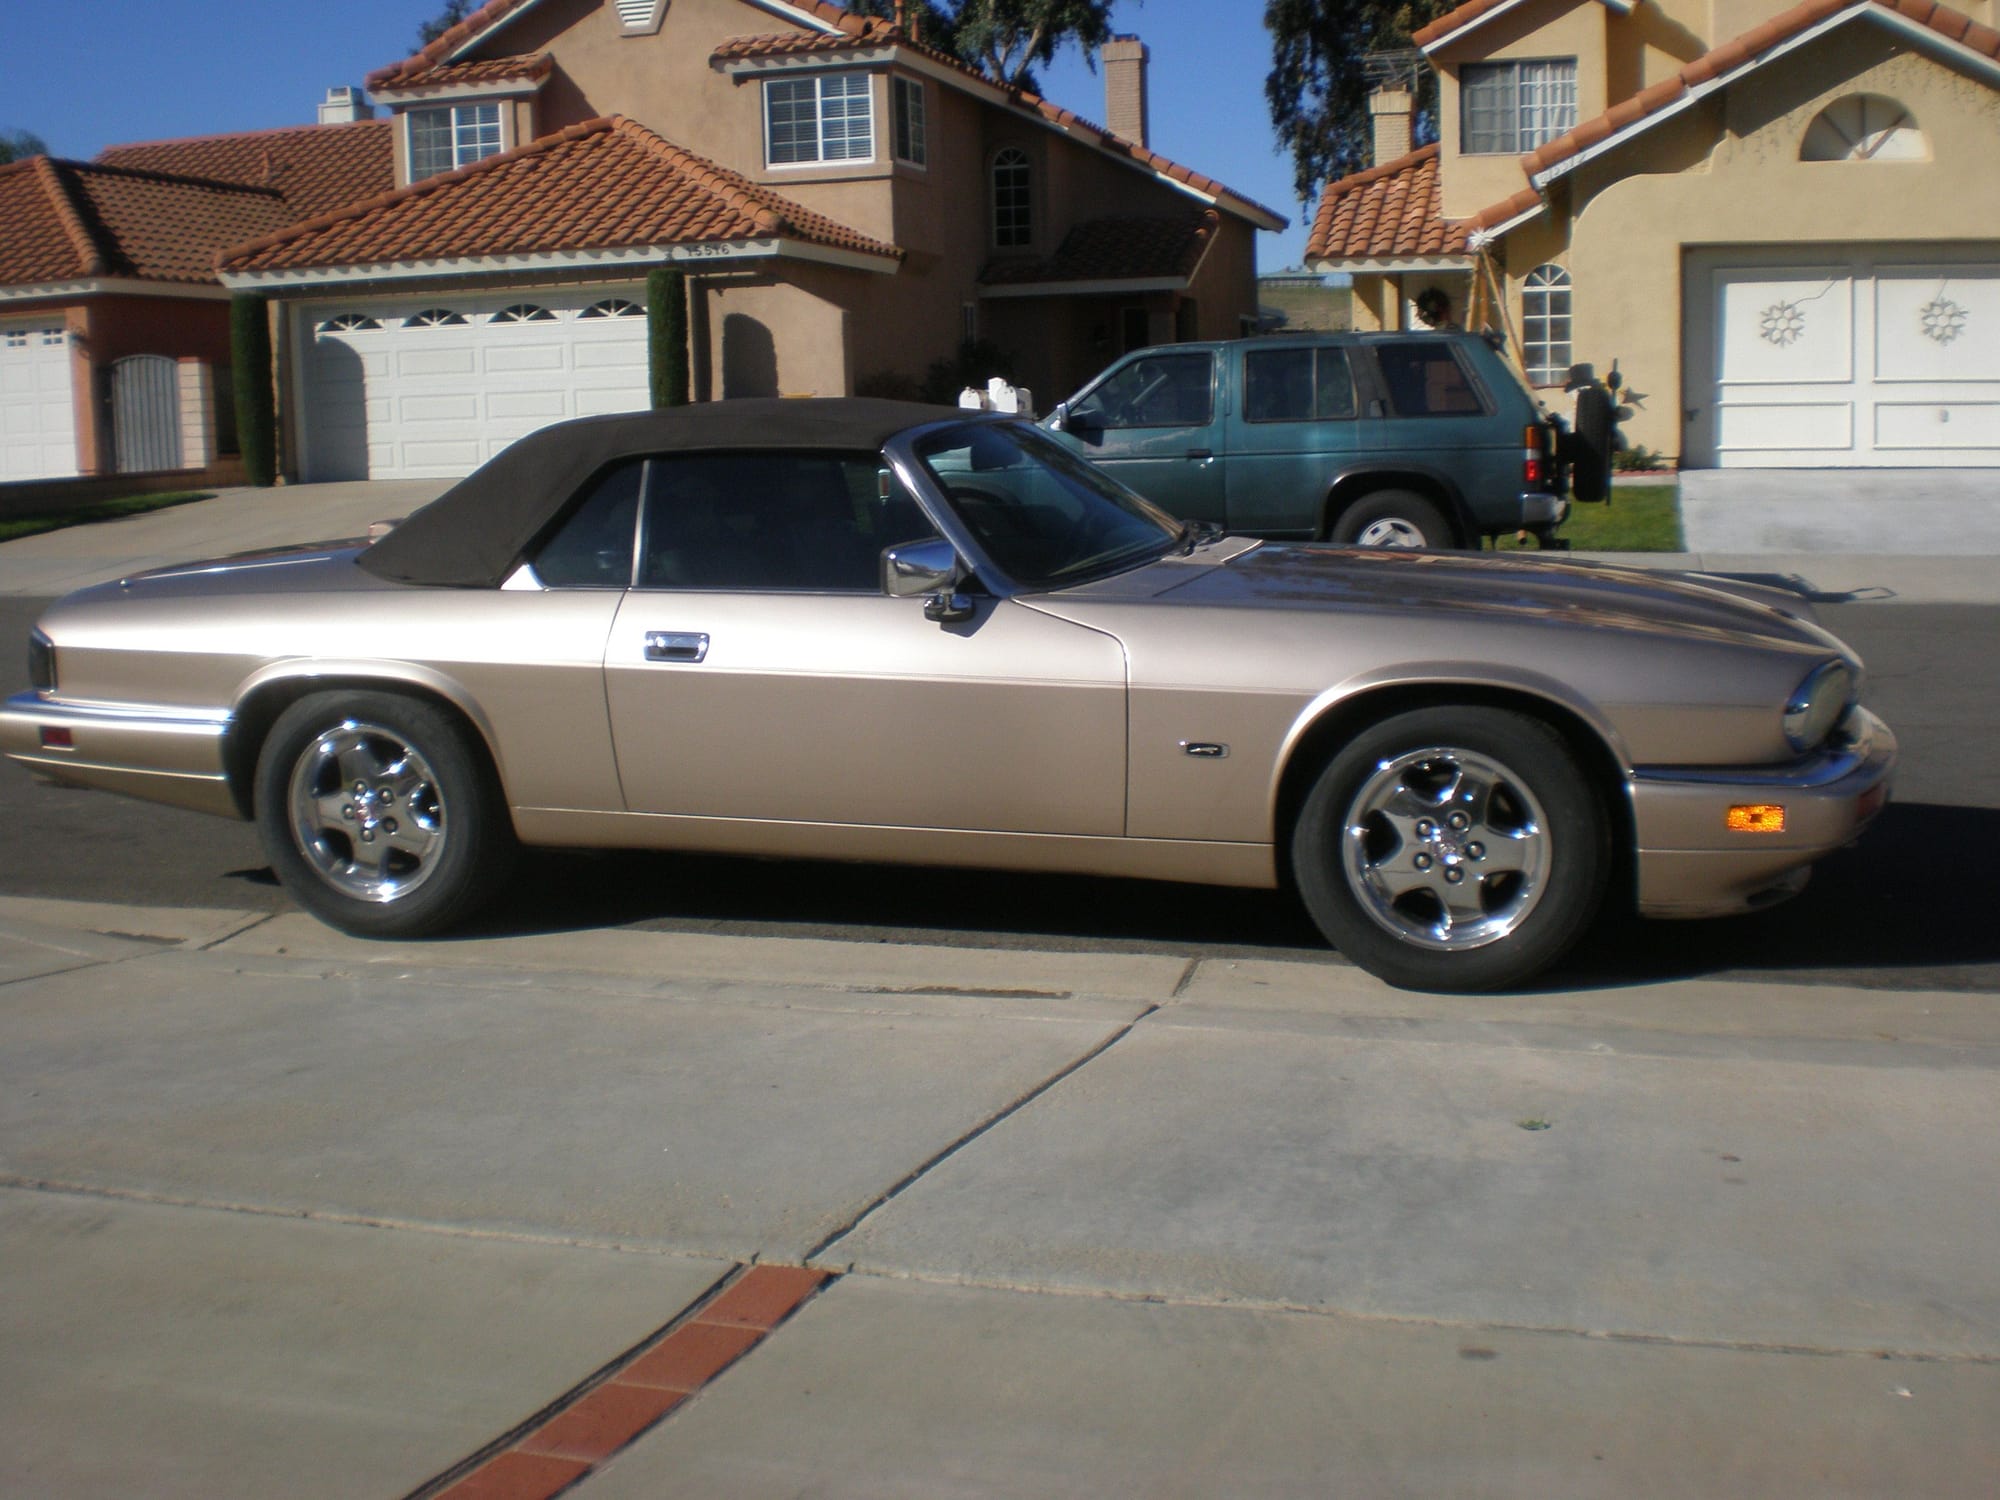 1994 Jaguar XJS - 1994 XJS convertible - Used - VIN sajnx2741rc192807 - 6 cyl - 2WD - Automatic - Convertible - Gold - Desert Hot Springs, CA 92240, United States